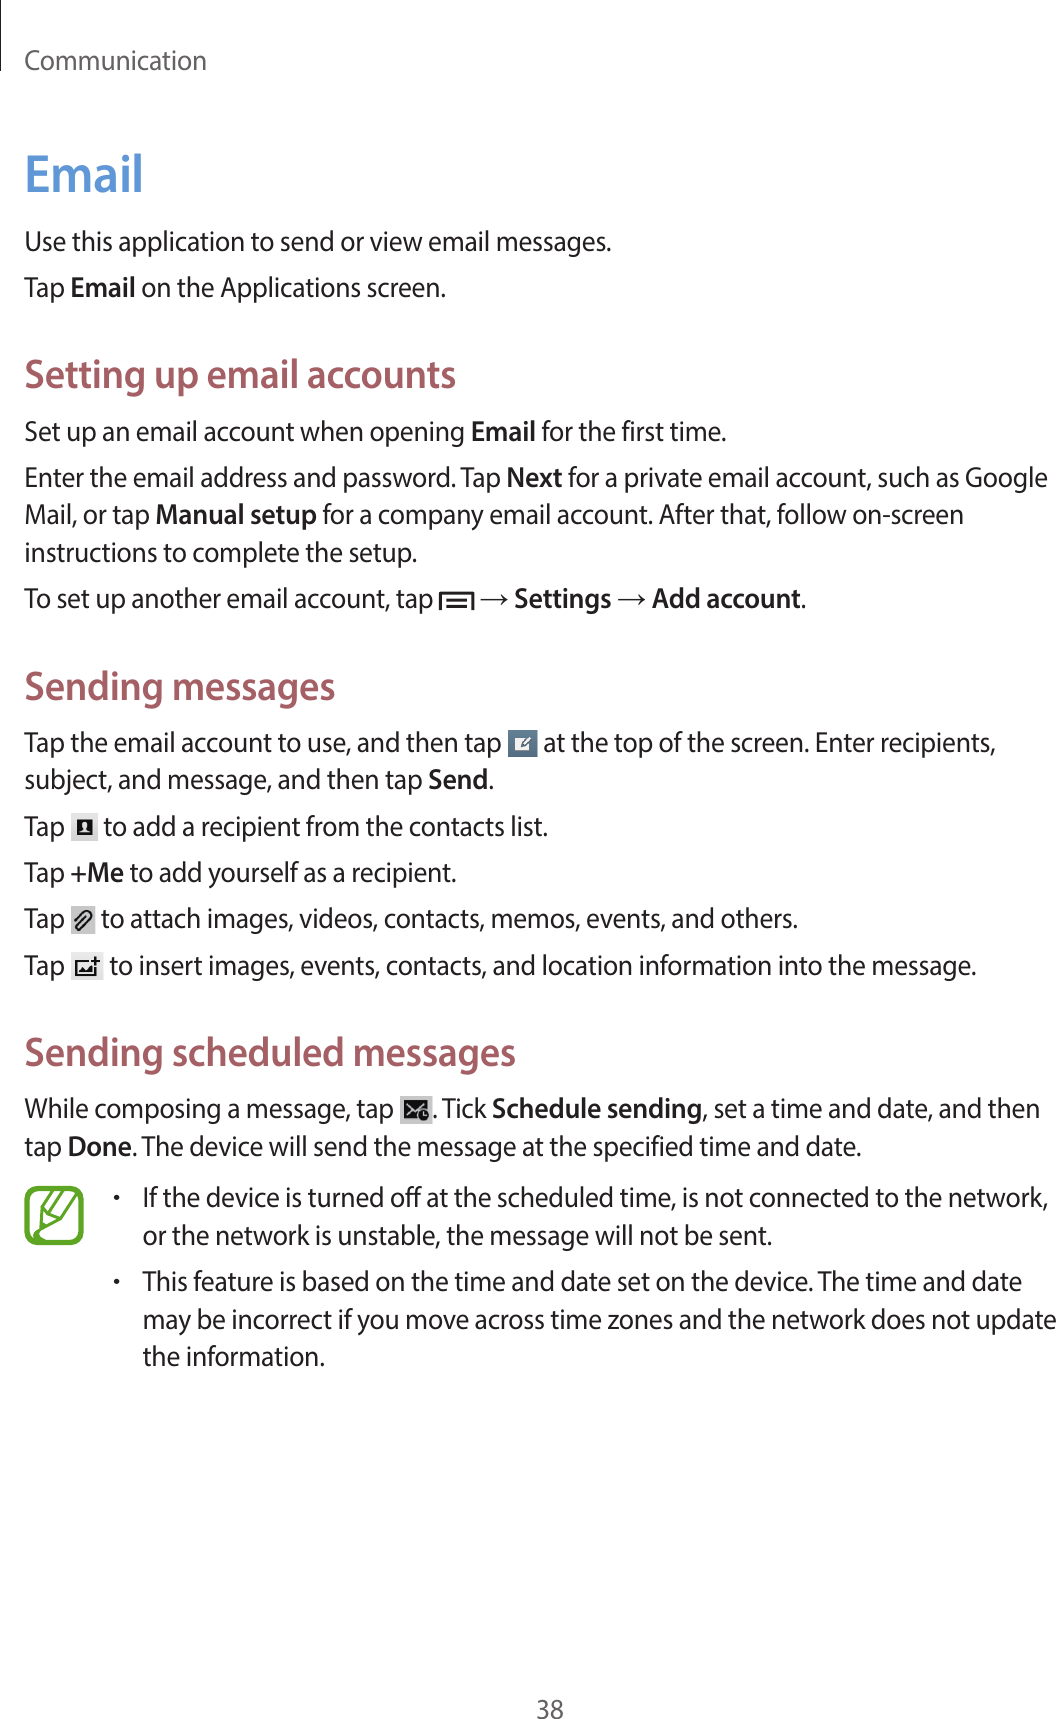 Communication38EmailUse this application to send or view email messages.Tap Email on the Applications screen.Setting up email accountsSet up an email account when opening Email for the first time.Enter the email address and password. Tap Next for a private email account, such as Google Mail, or tap Manual setup for a company email account. After that, follow on-screen instructions to complete the setup.To set up another email account, tap   → Settings → Add account.Sending messagesTap the email account to use, and then tap   at the top of the screen. Enter recipients, subject, and message, and then tap Send.Tap   to add a recipient from the contacts list.Tap +Me to add yourself as a recipient.Tap   to attach images, videos, contacts, memos, events, and others.Tap   to insert images, events, contacts, and location information into the message.Sending scheduled messagesWhile composing a message, tap  . Tick Schedule sending, set a time and date, and then tap Done. The device will send the message at the specified time and date.•If the device is turned off at the scheduled time, is not connected to the network, or the network is unstable, the message will not be sent.•This feature is based on the time and date set on the device. The time and date may be incorrect if you move across time zones and the network does not update the information.